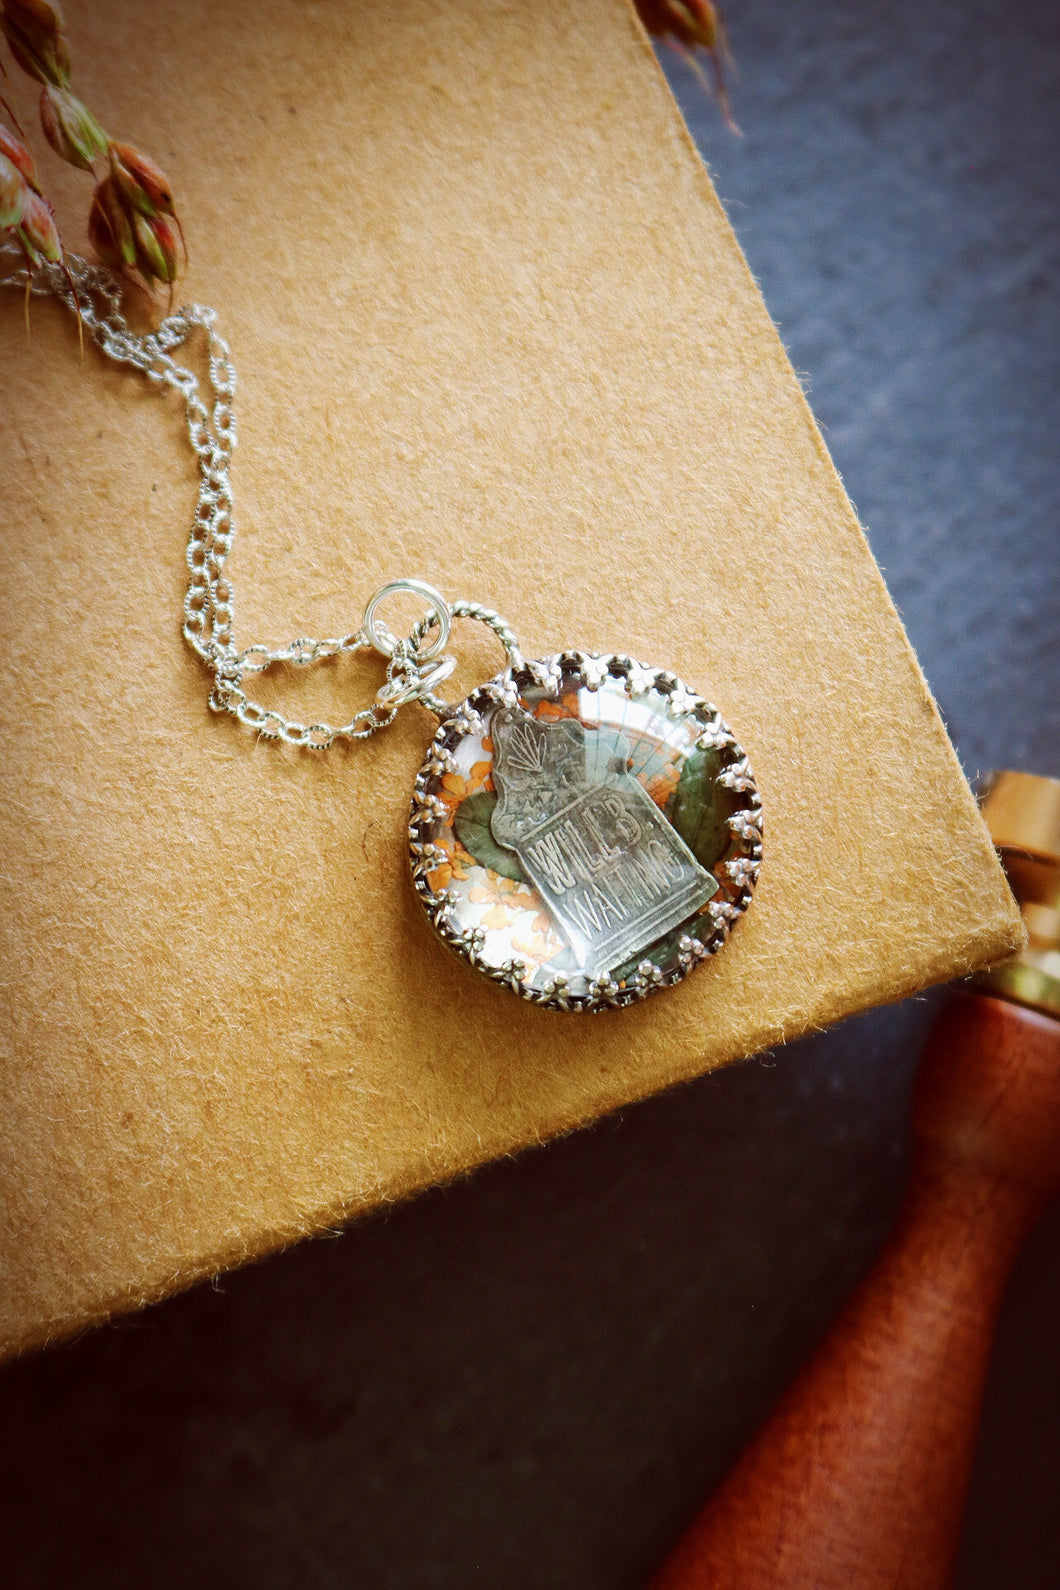 Tombstone + Pressed Flowers Encased in Glass Necklace